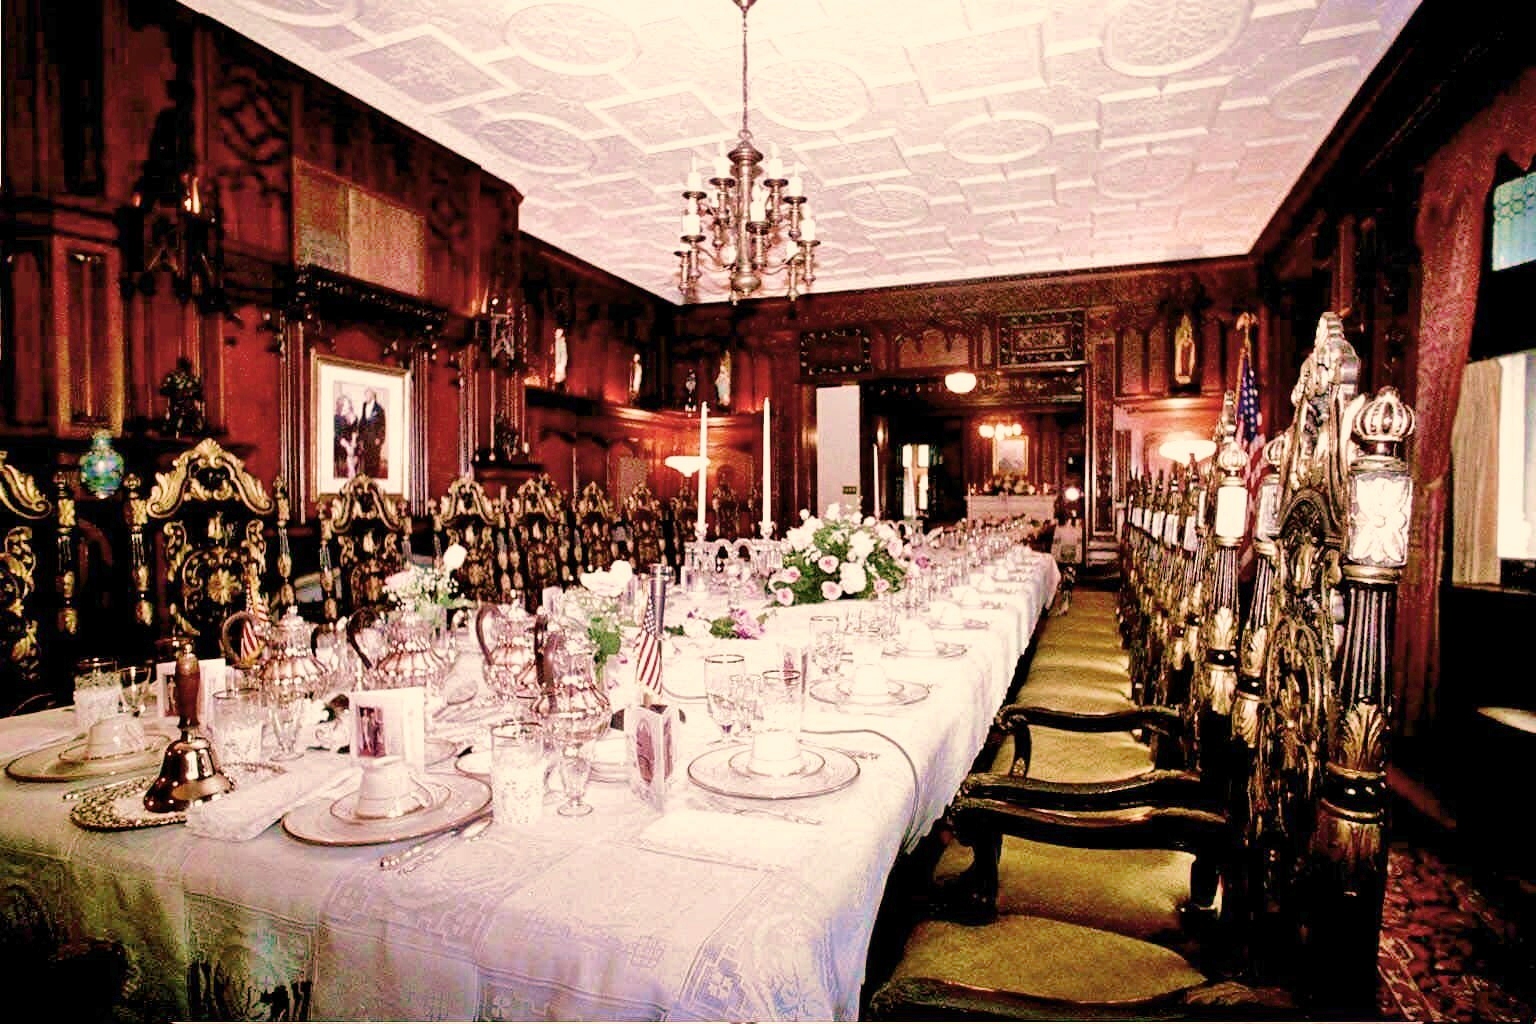 The Chapel Dining Room, The Mount of the House of the Lord.